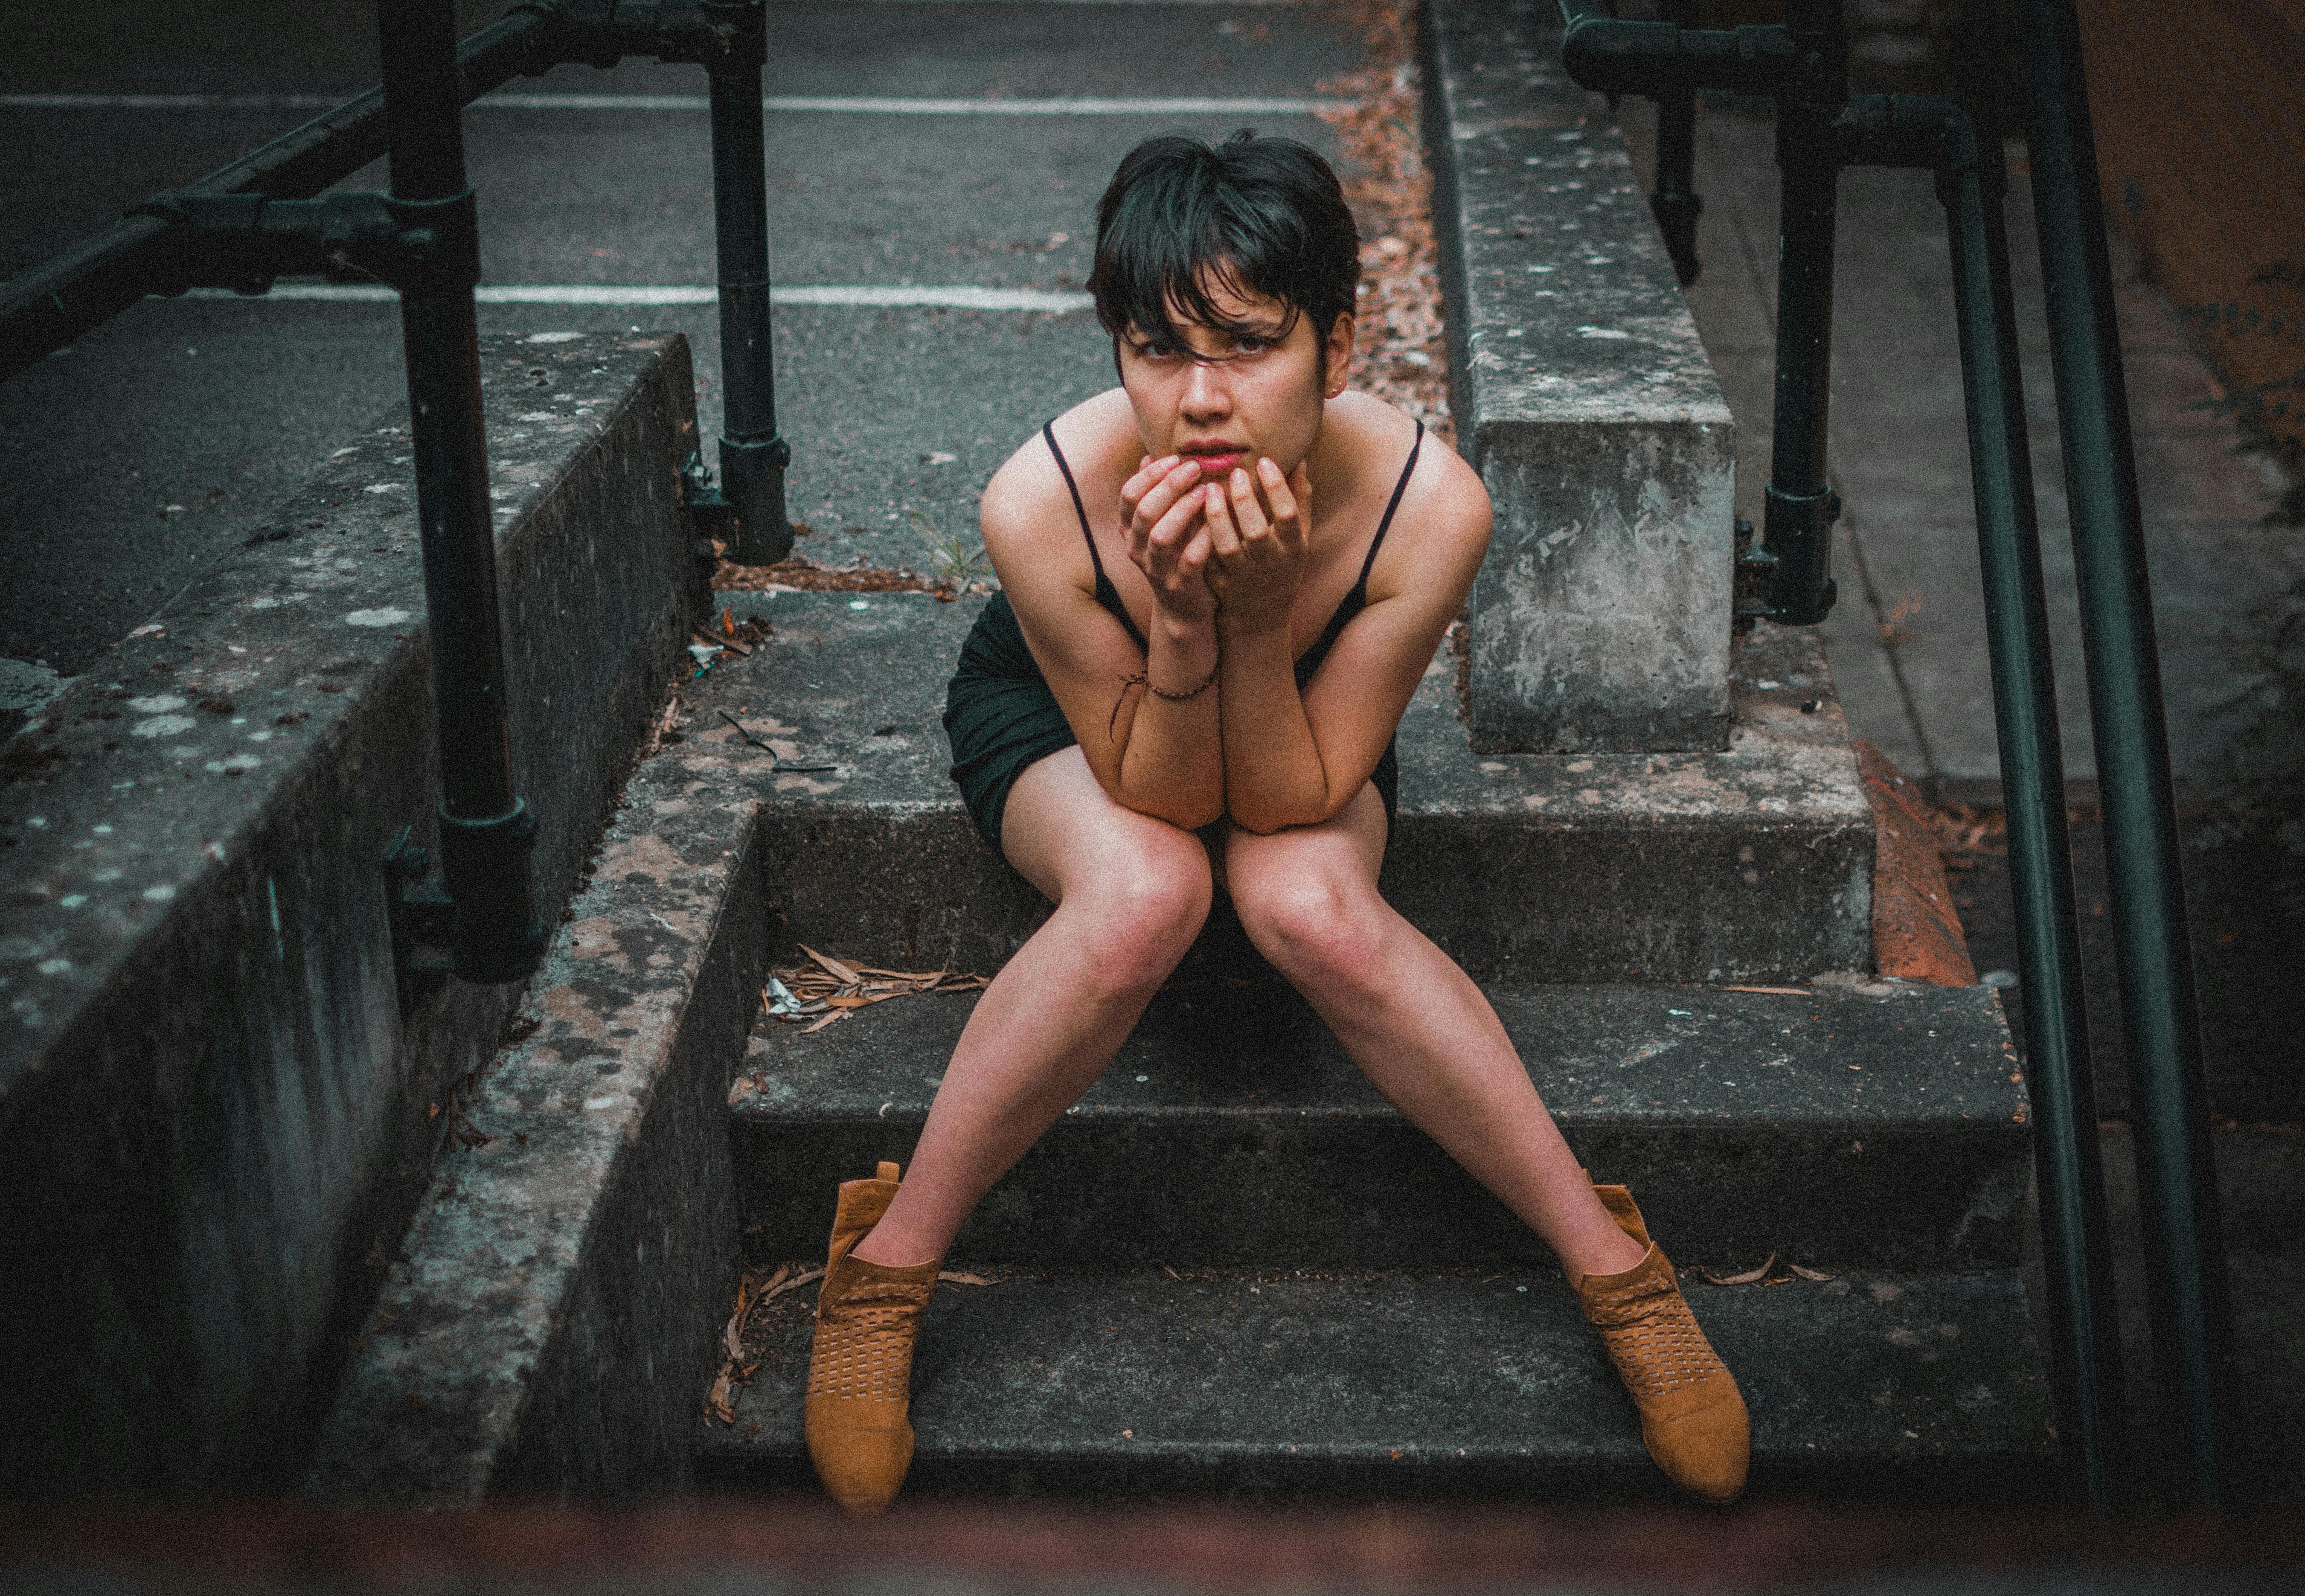 Woman Sitting on Concrete Stairs